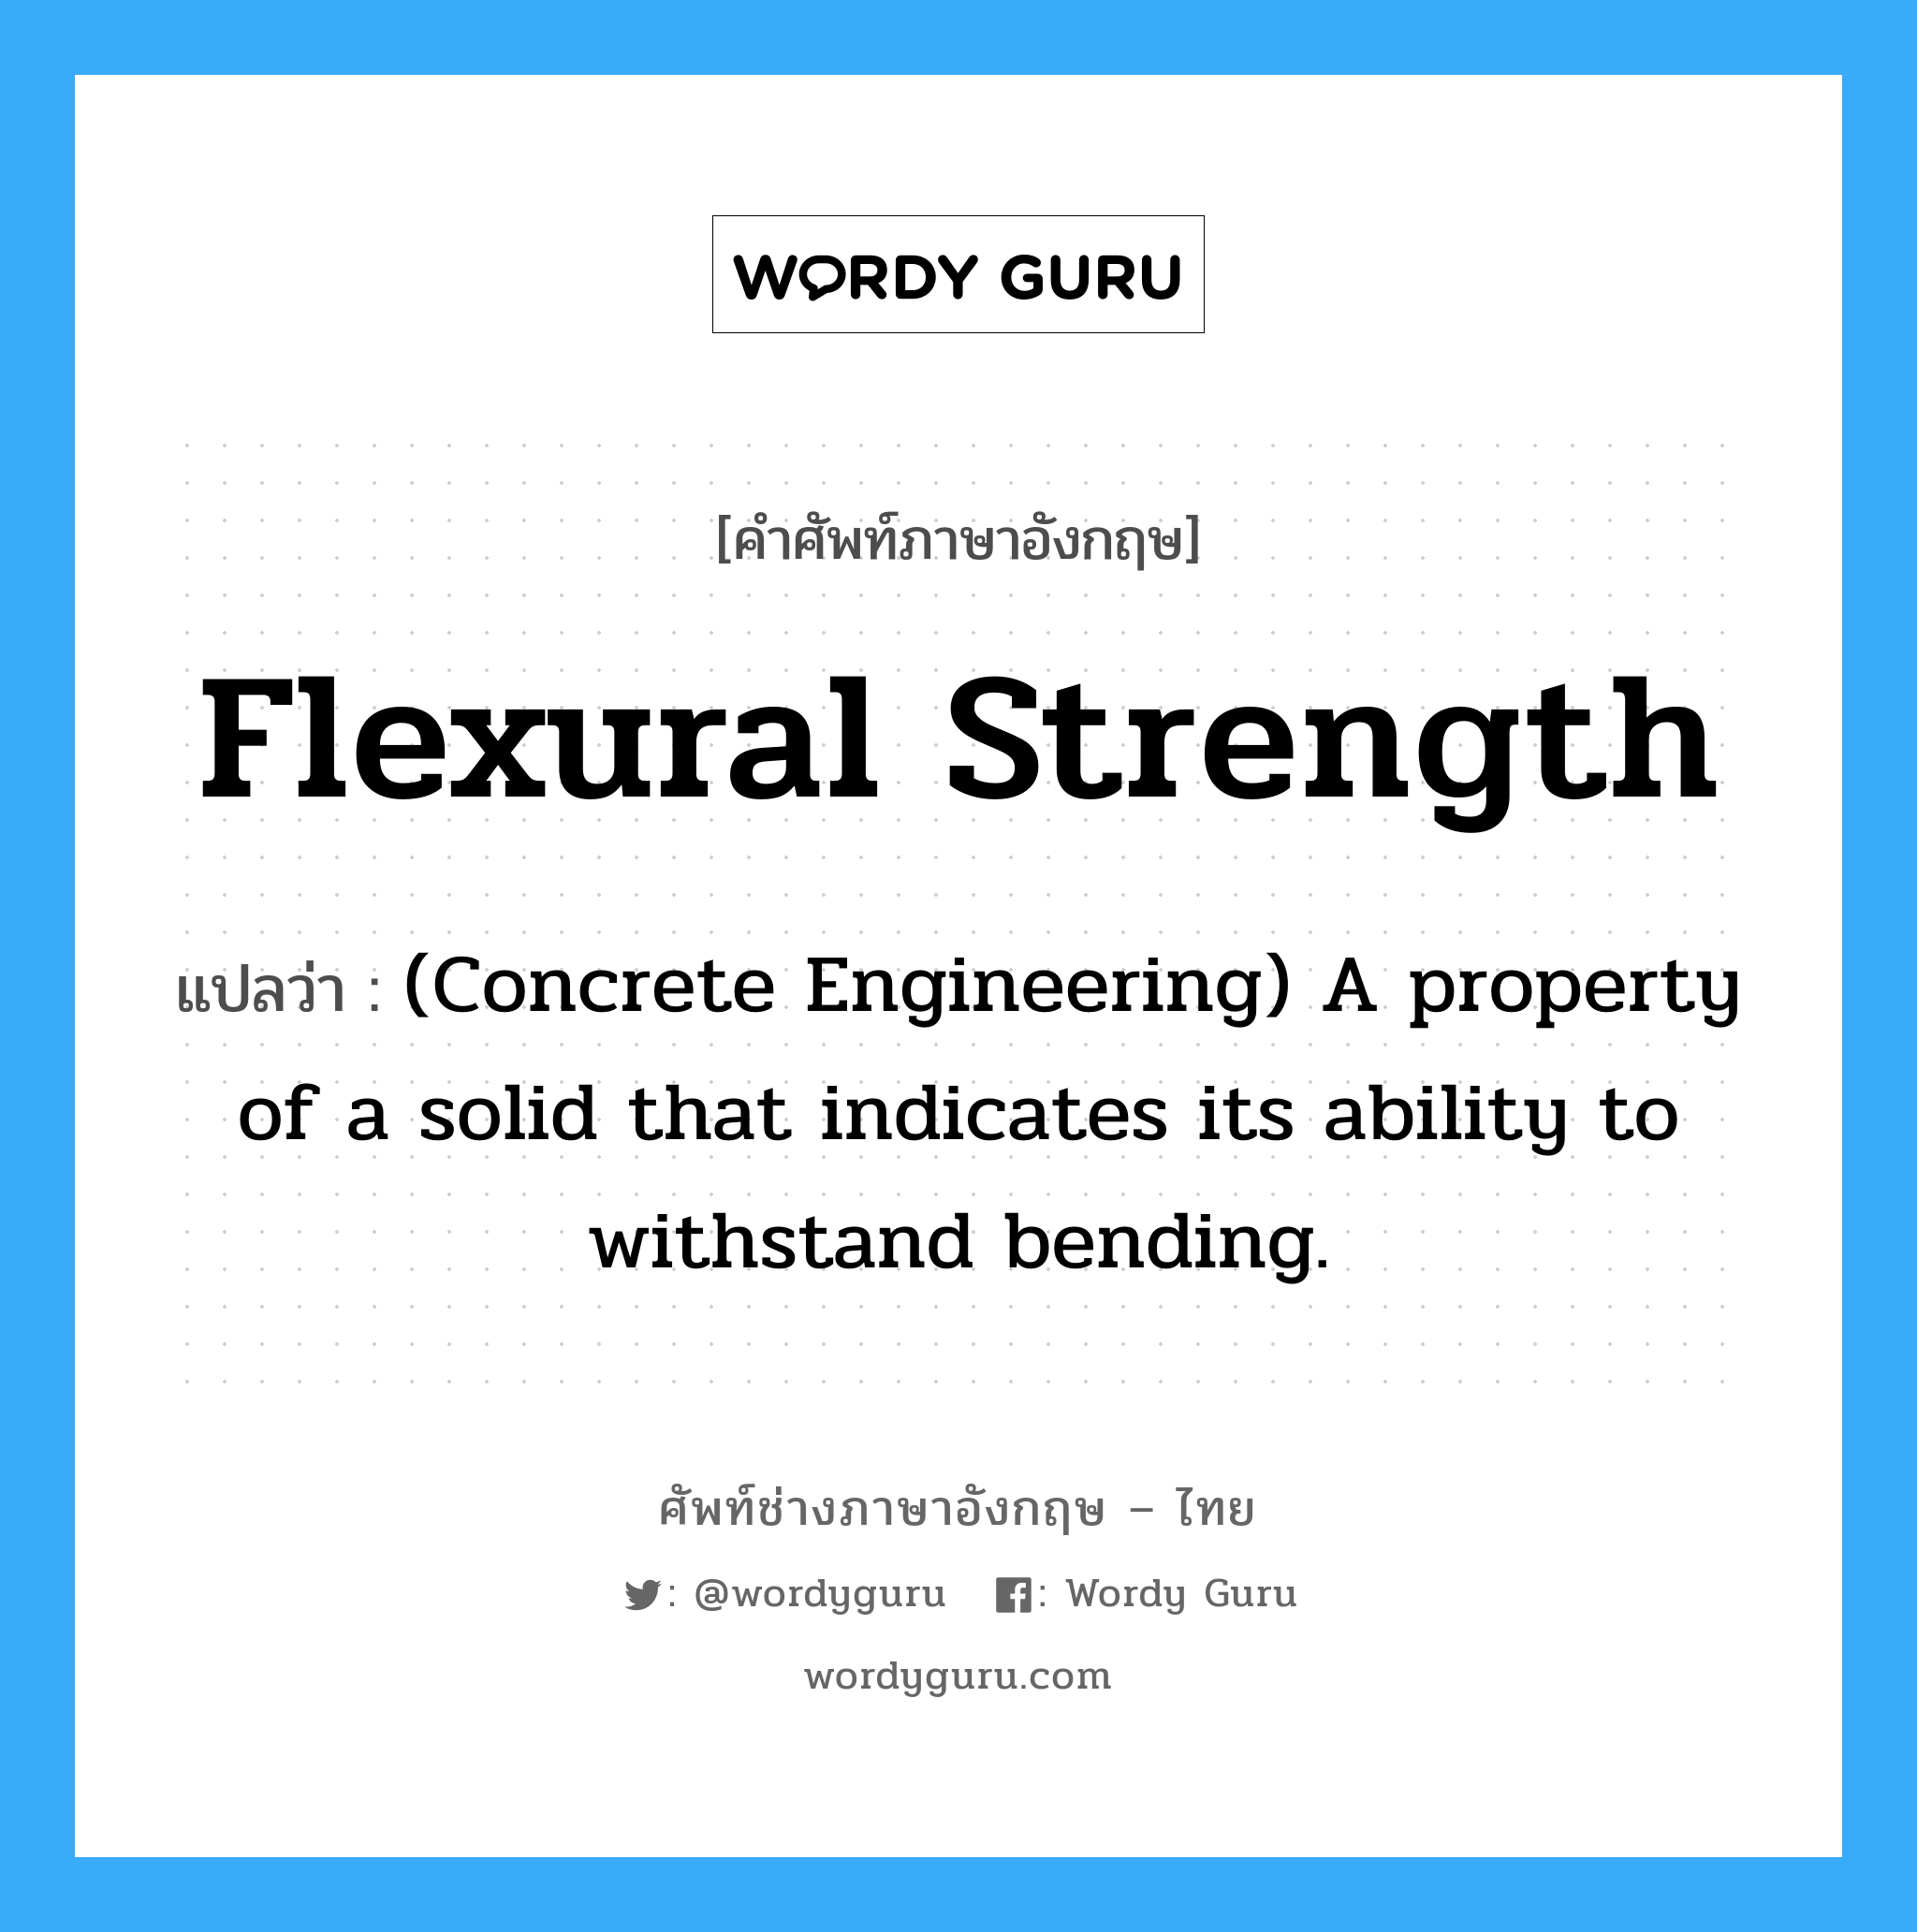 Flexural Strength แปลว่า?, คำศัพท์ช่างภาษาอังกฤษ - ไทย Flexural Strength คำศัพท์ภาษาอังกฤษ Flexural Strength แปลว่า (Concrete Engineering) A property of a solid that indicates its ability to withstand bending.